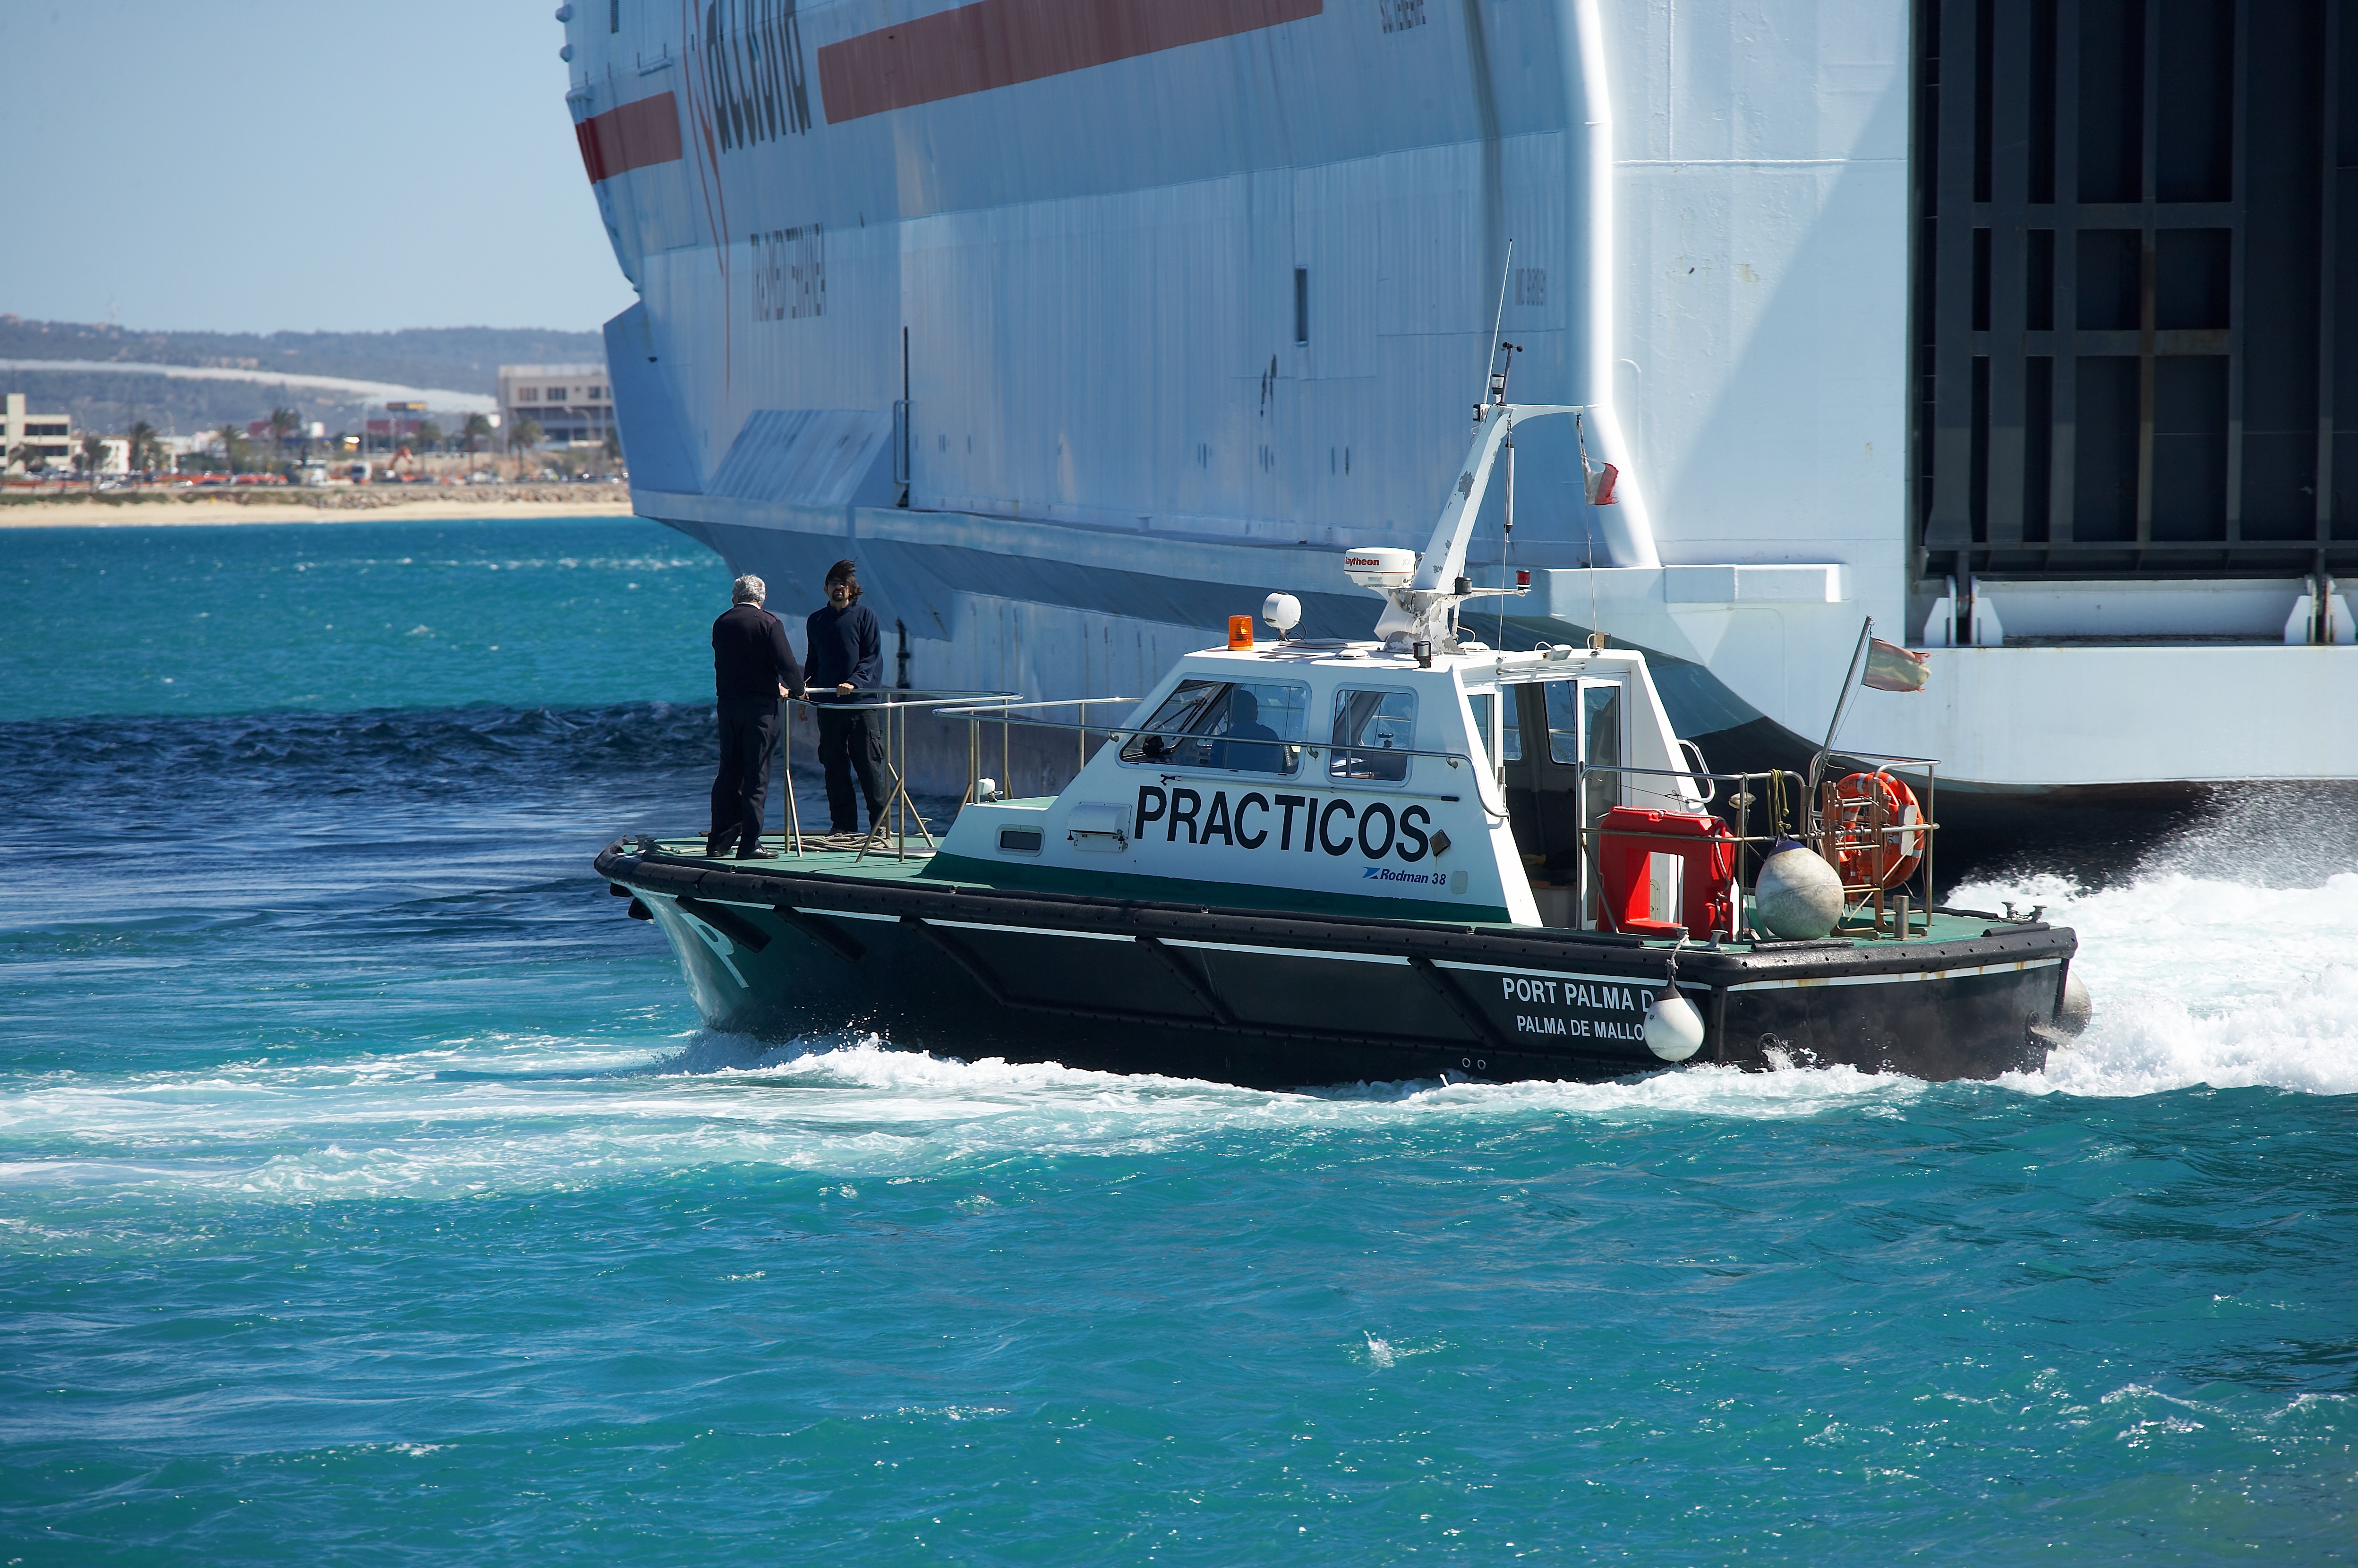 The pilots of Palma's Port, the first ones in Spain to obtain an international pilotage certification